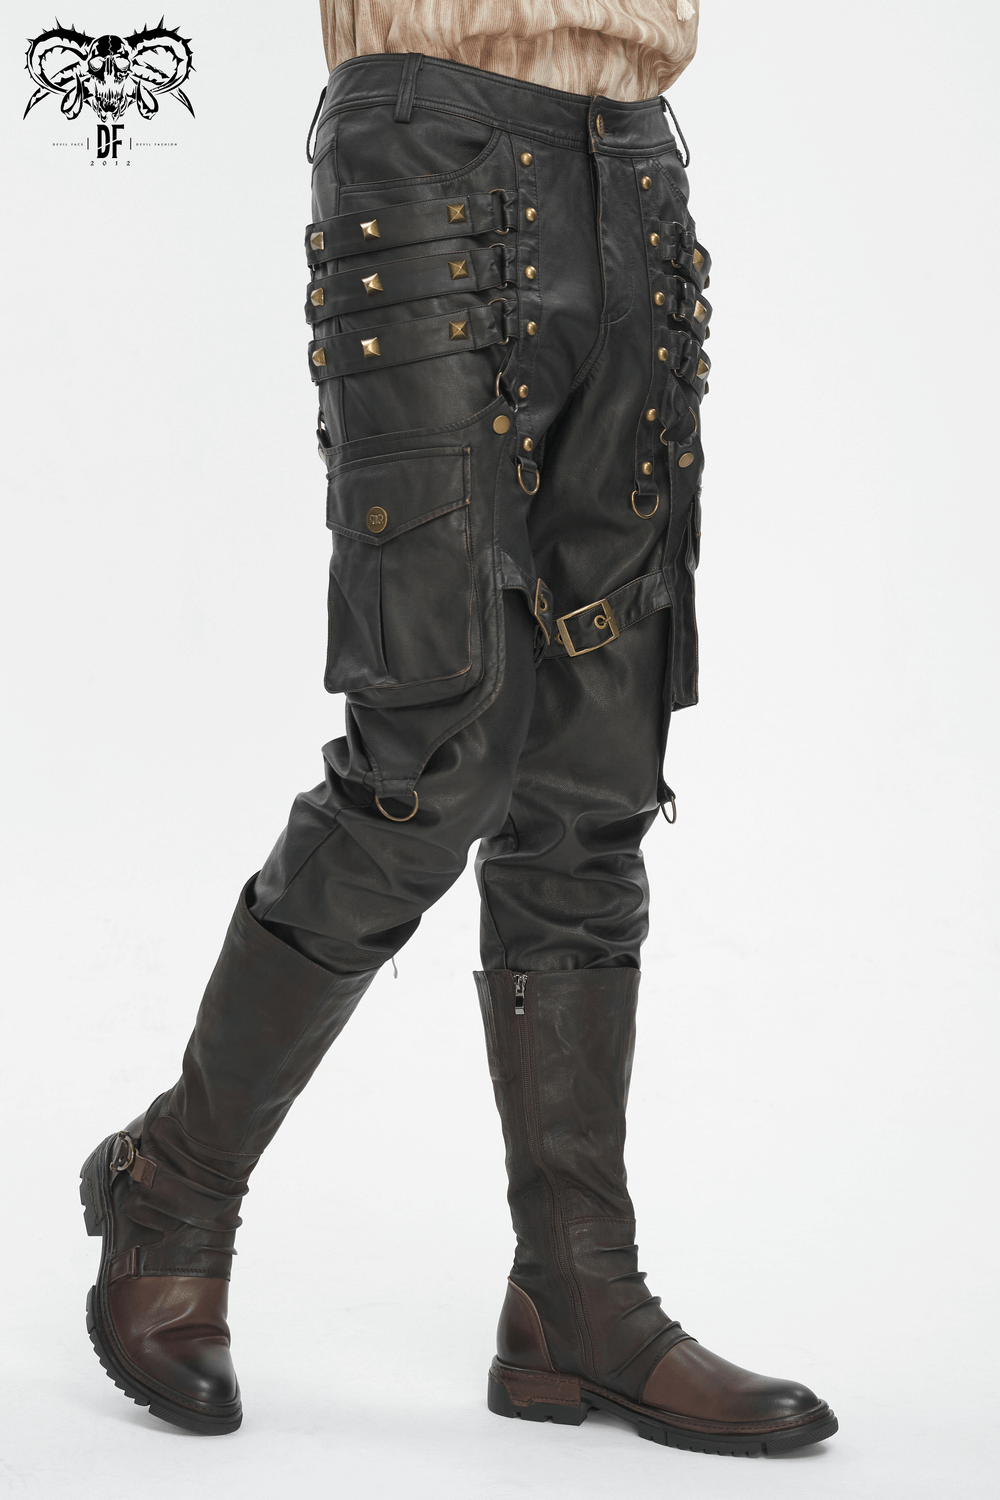 Men's Gothic Punk Faux Leather Pants with Studs